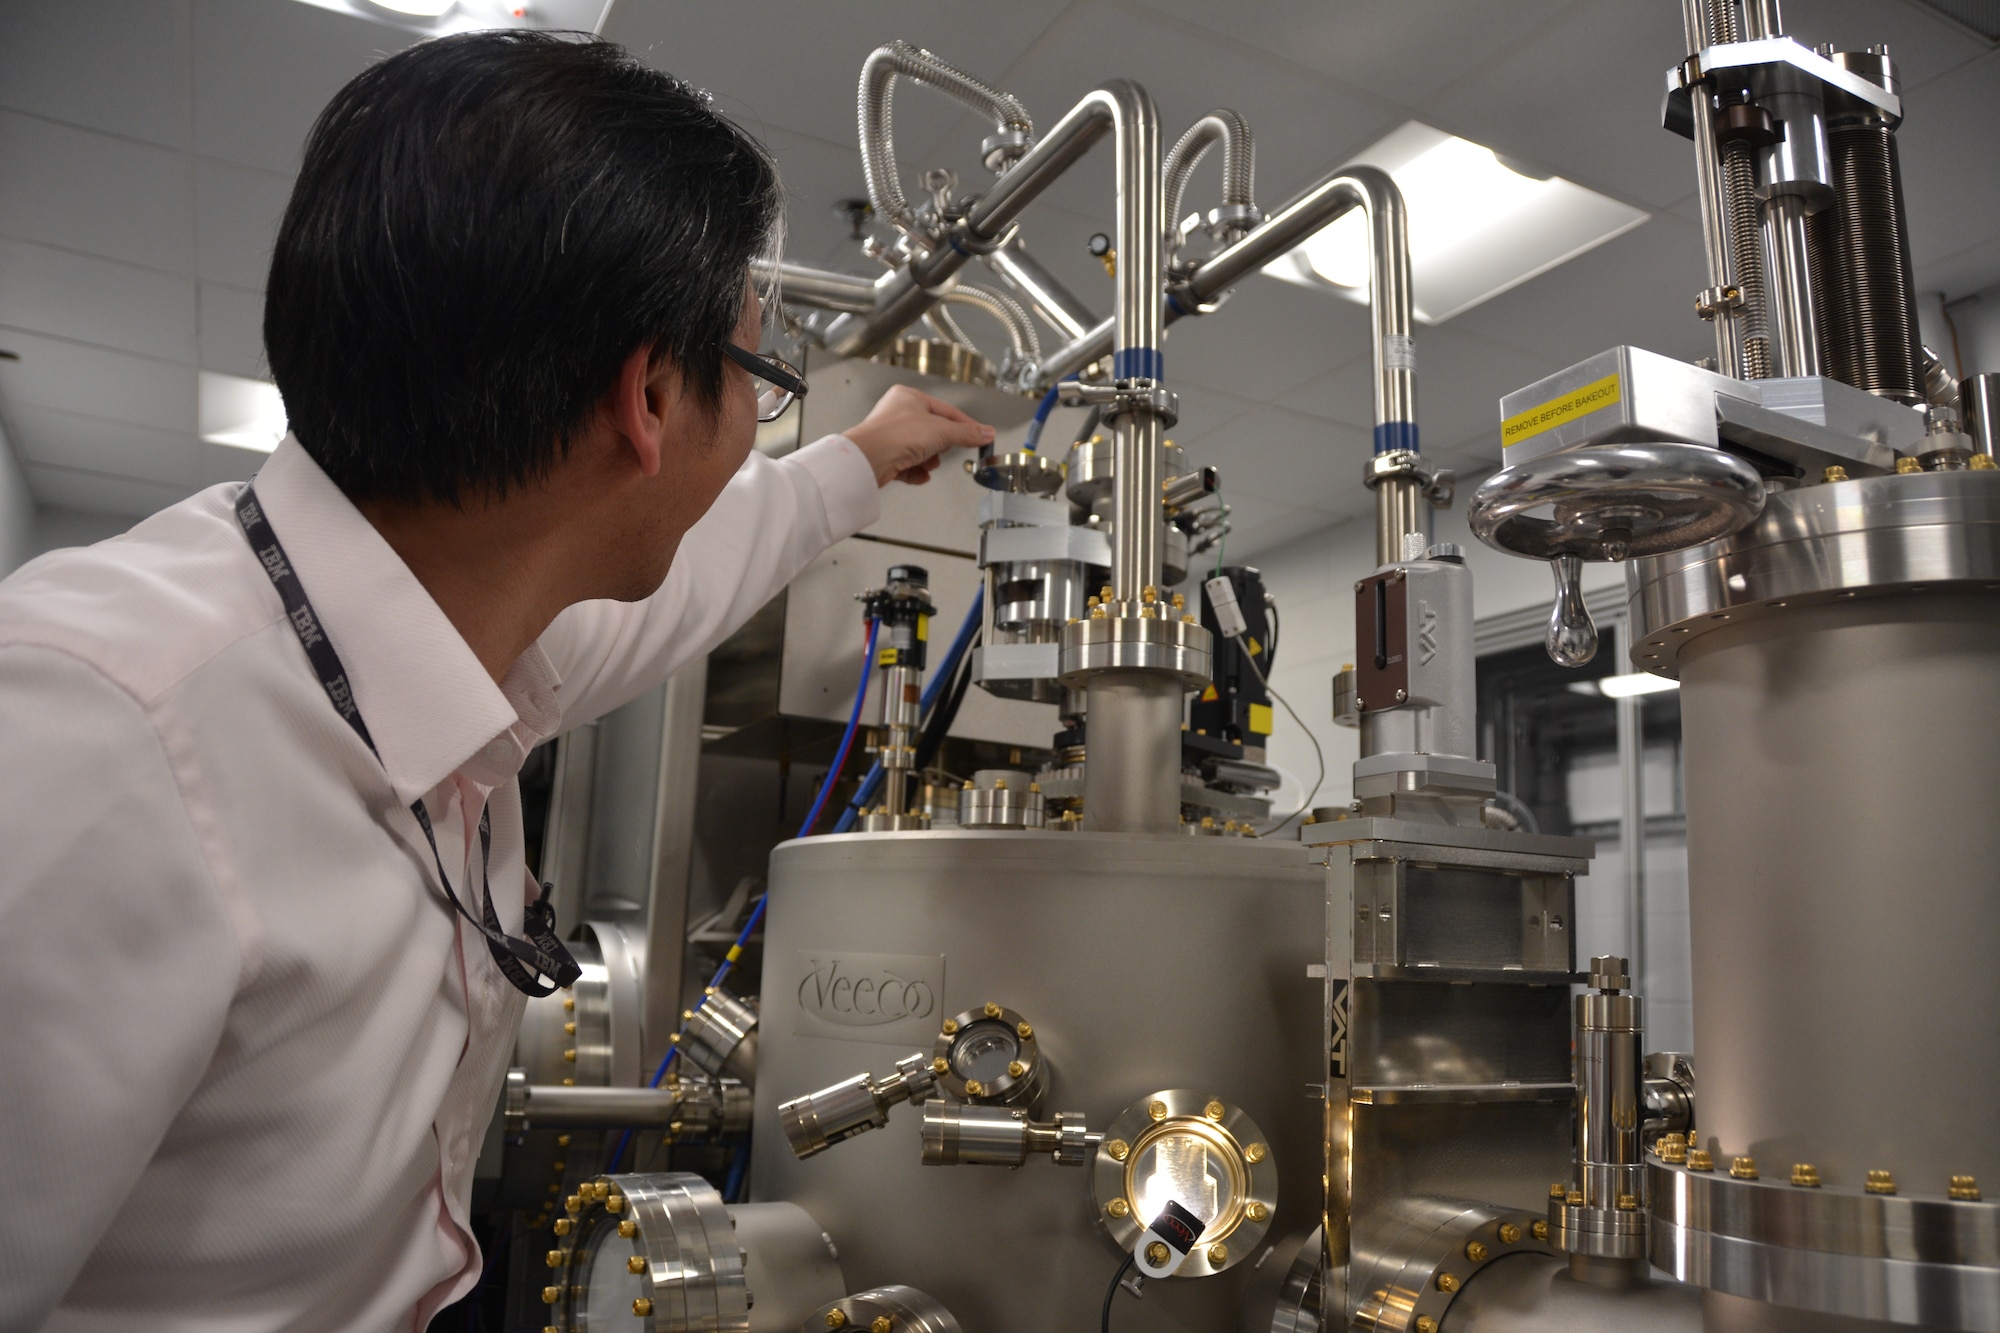 AFRL Materials Researcher Dr. Shin Mou shows off the laboratory’s new Molecular Beam Epitaxy chamber, a highly-specialized piece of equipment enabling the growth of semiconducting materials for a new breed of lighter, smaller, more agile electronics. (U.S. Air Force Photo/Adrienne Kreighbaum)